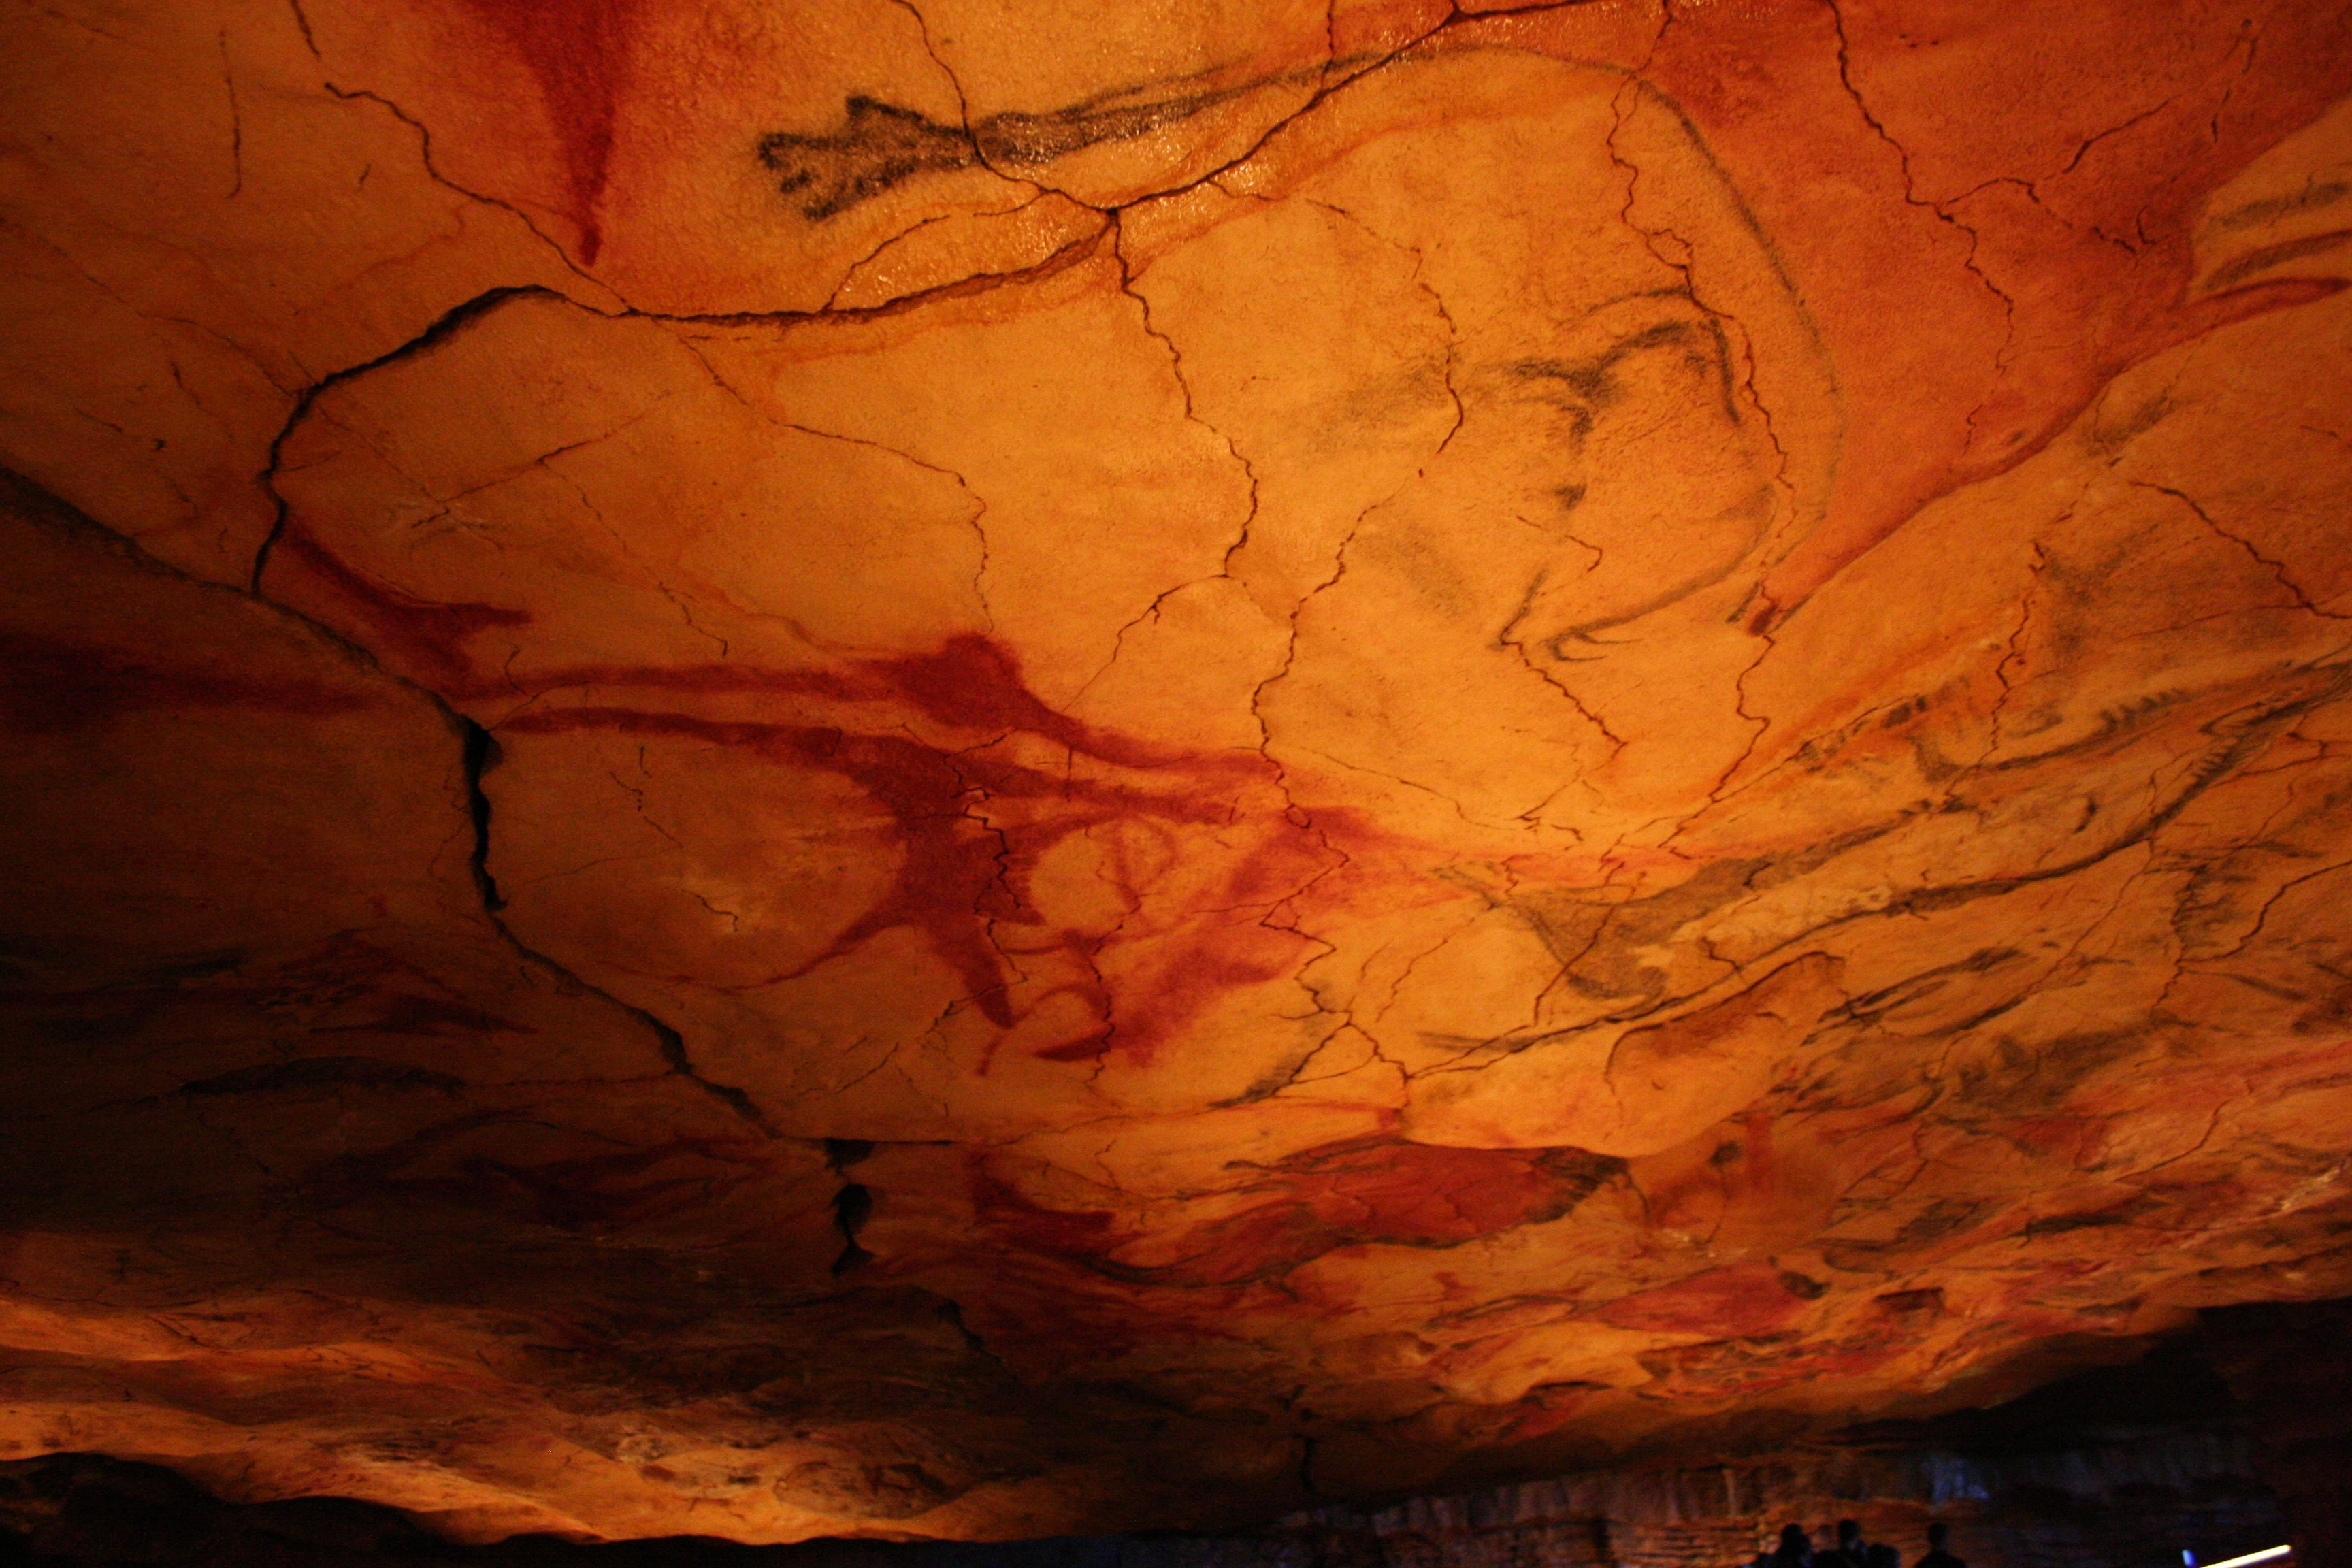 Cave of Altamira and Paleolithic Cave Art of Northern Spain (UNESCO 1985)